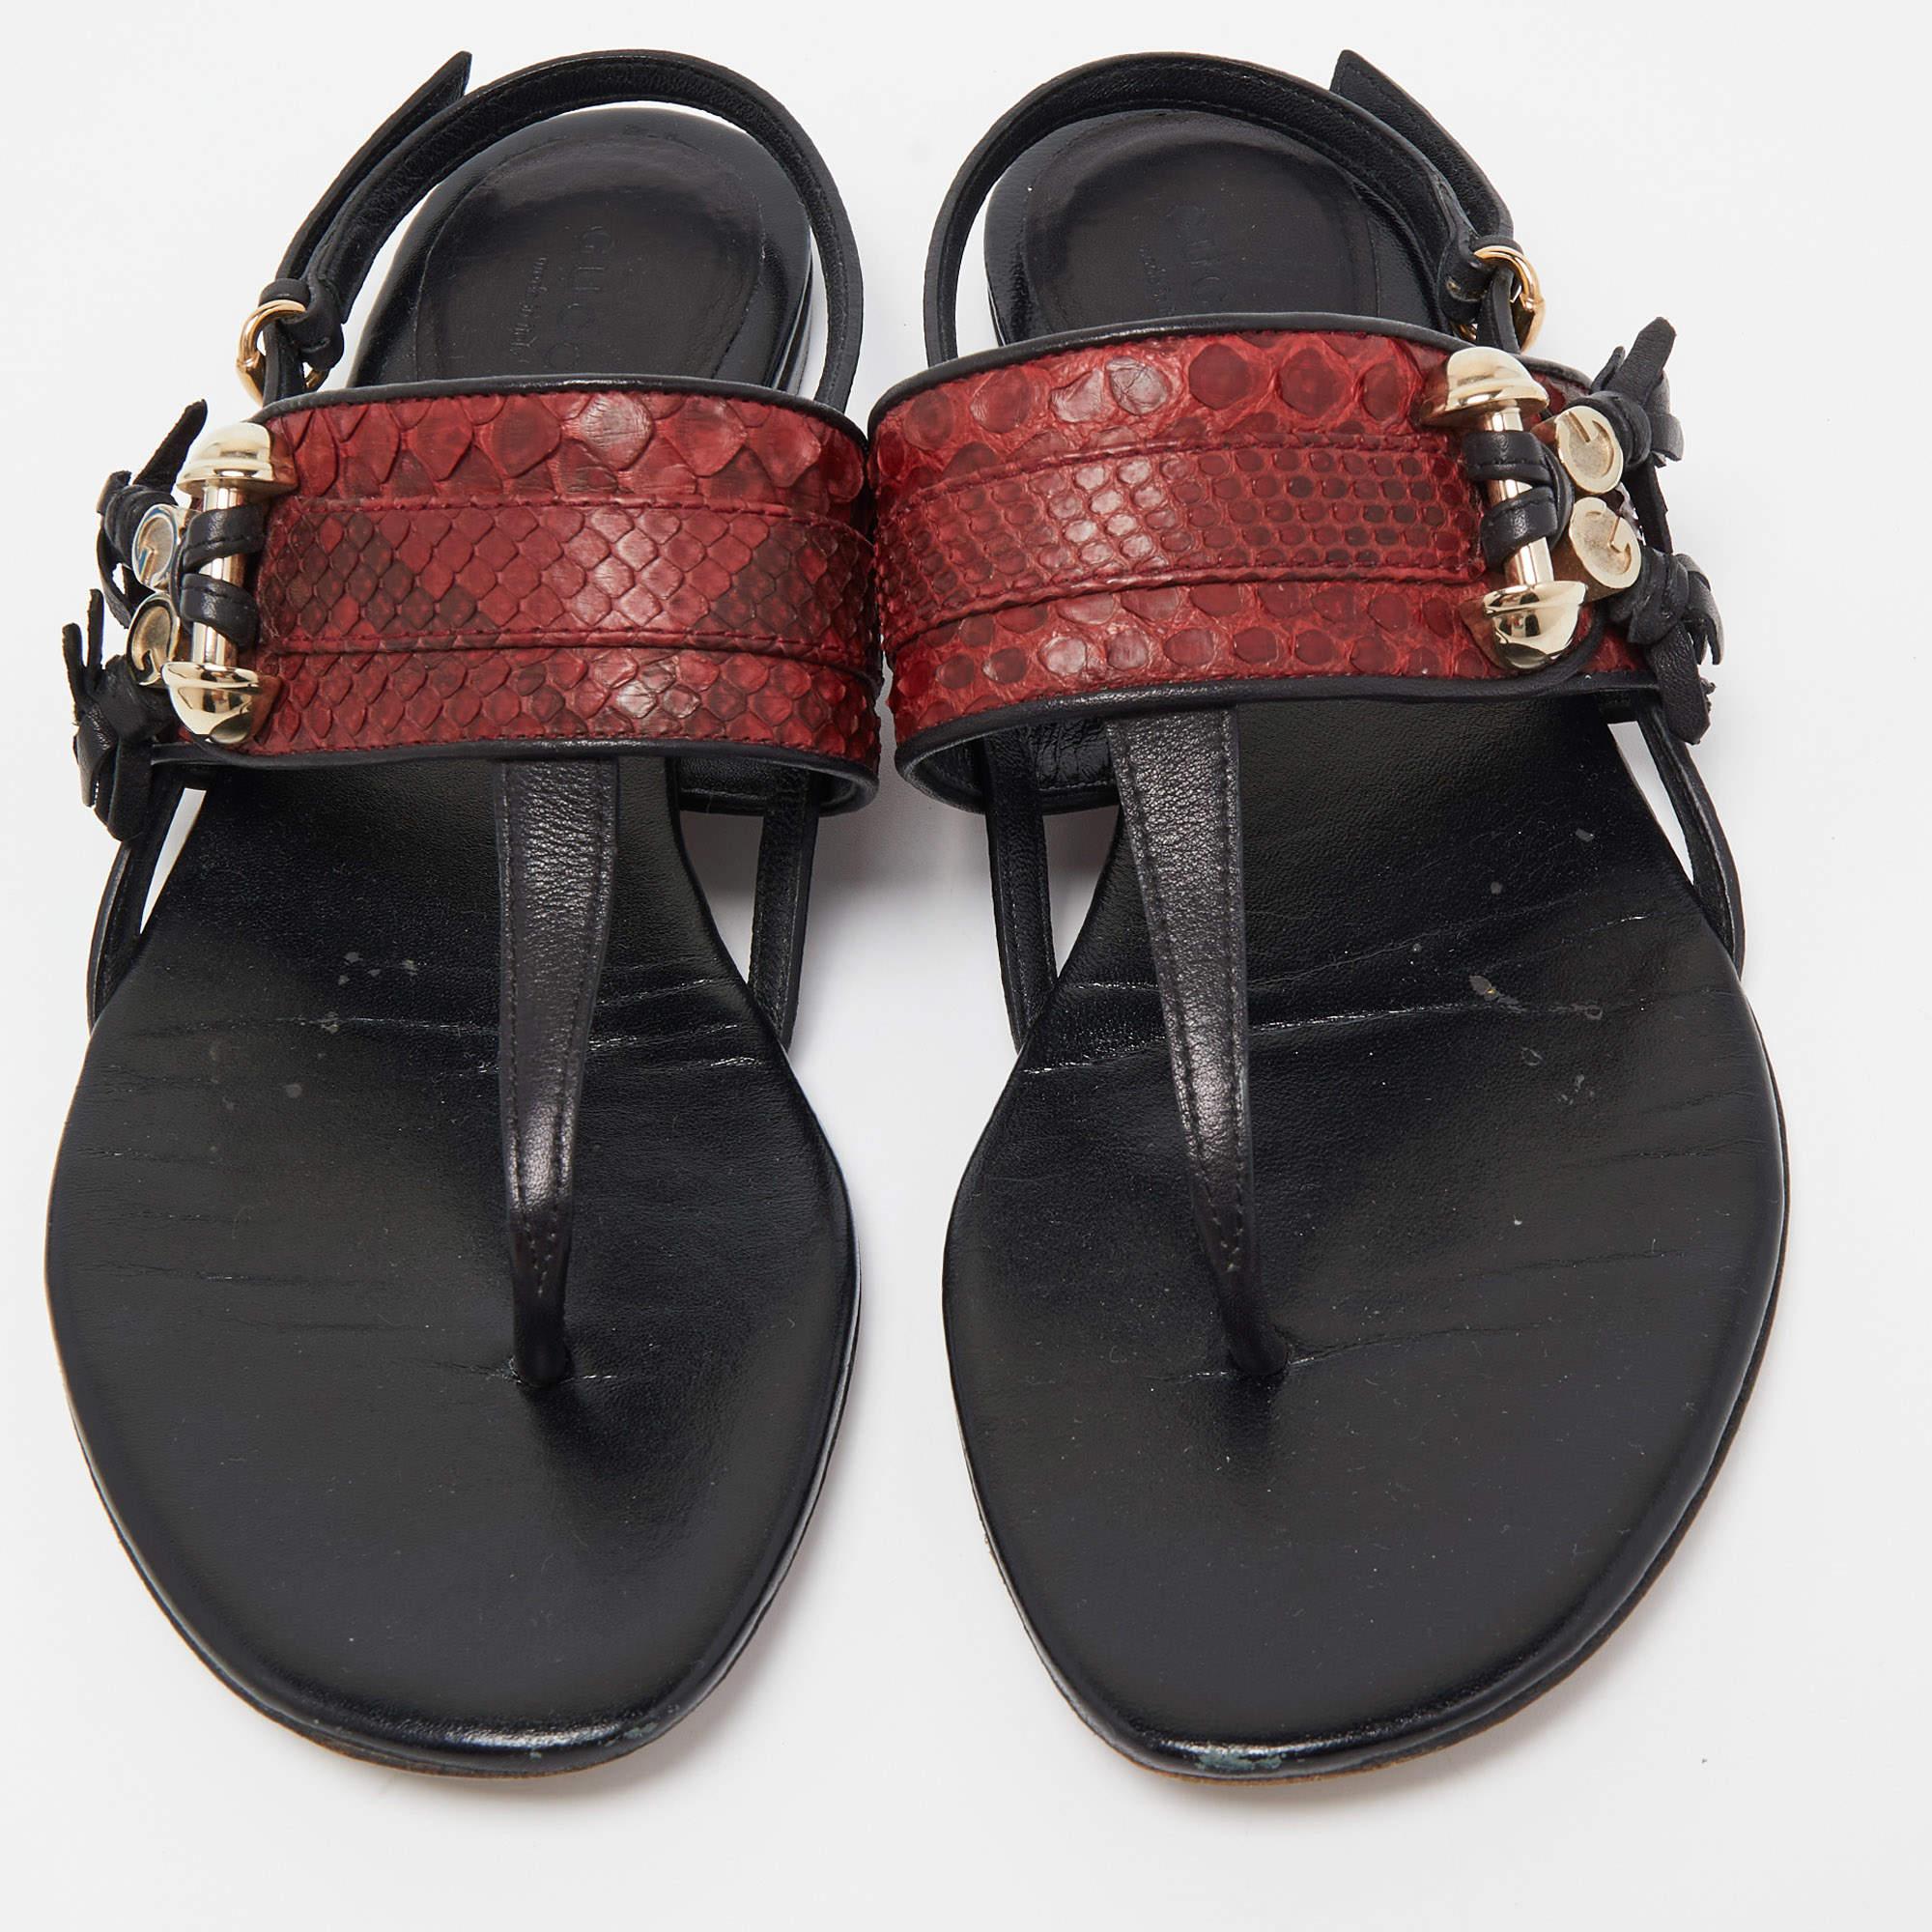 Gucci Red/Black Python and Leather Thong Flat Sandals Size 37 In Good Condition For Sale In Dubai, Al Qouz 2